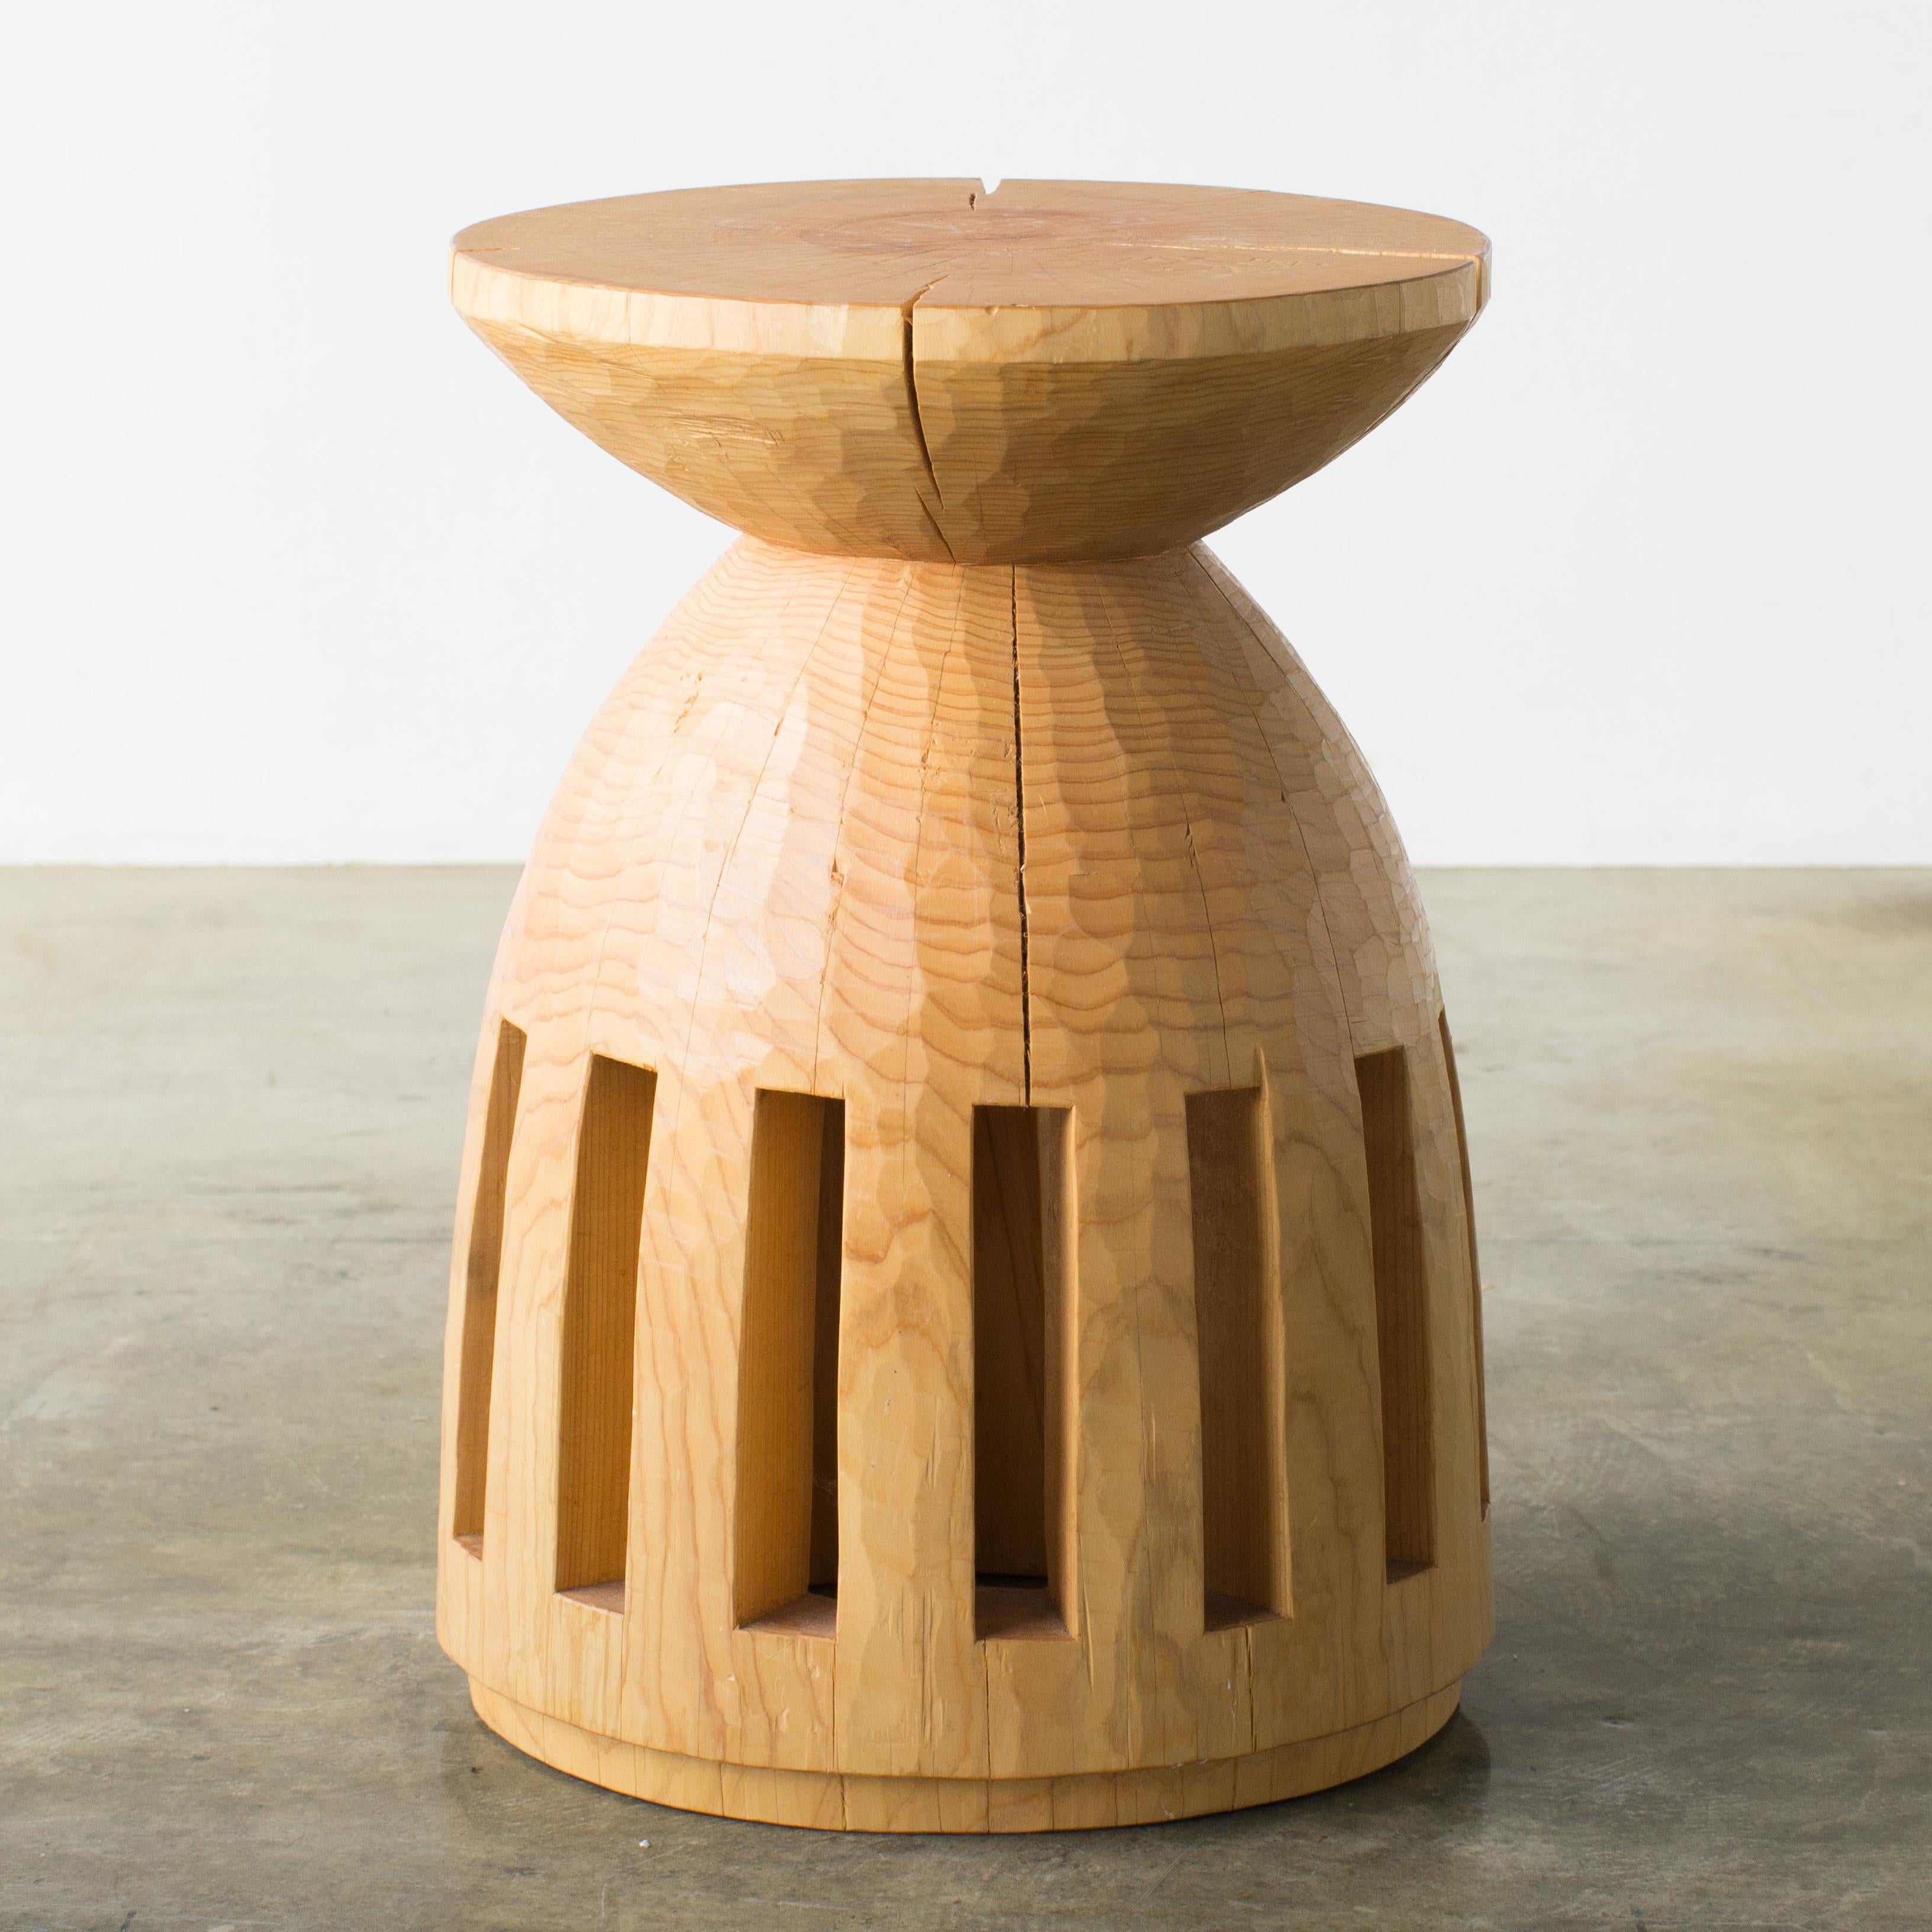 Name: A day for going to the ocean
Sculptural stool by Hiroyuki Nishimura and zone carved furniture
Material: Cypress
This work is carved from log with some kinds of chainsaws.
Most of wood used for Nishimura's works are unable to use anything,